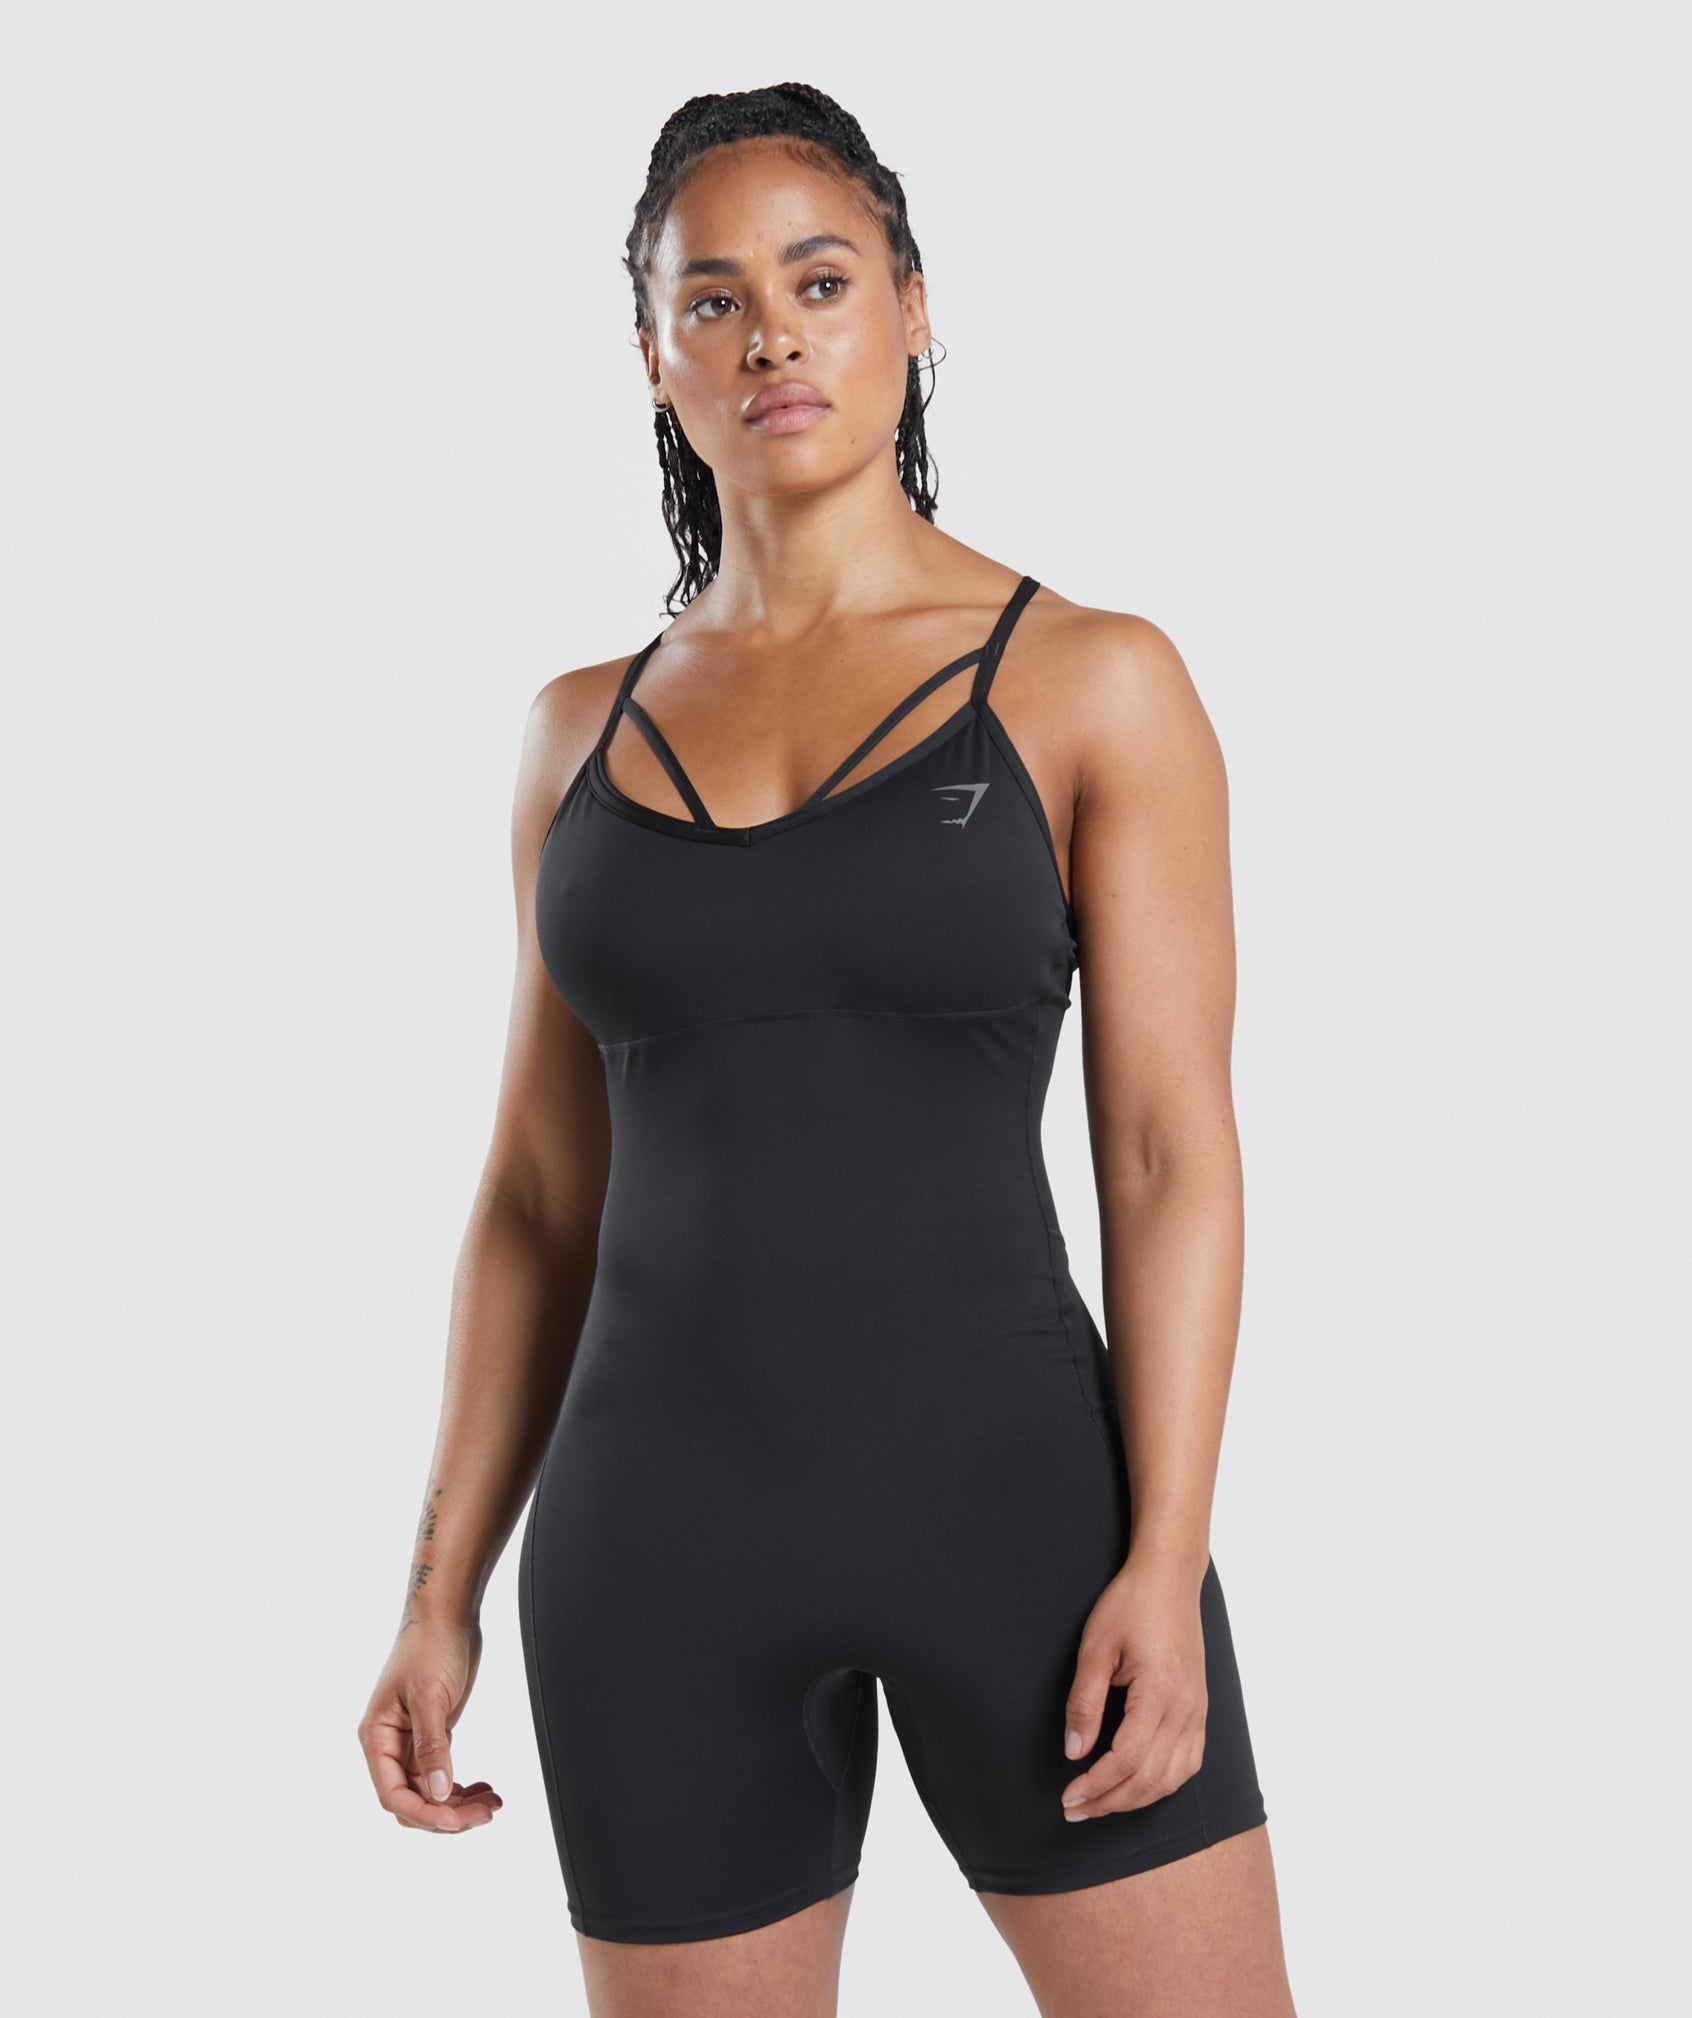 Gymshark GS Power All In One - Black